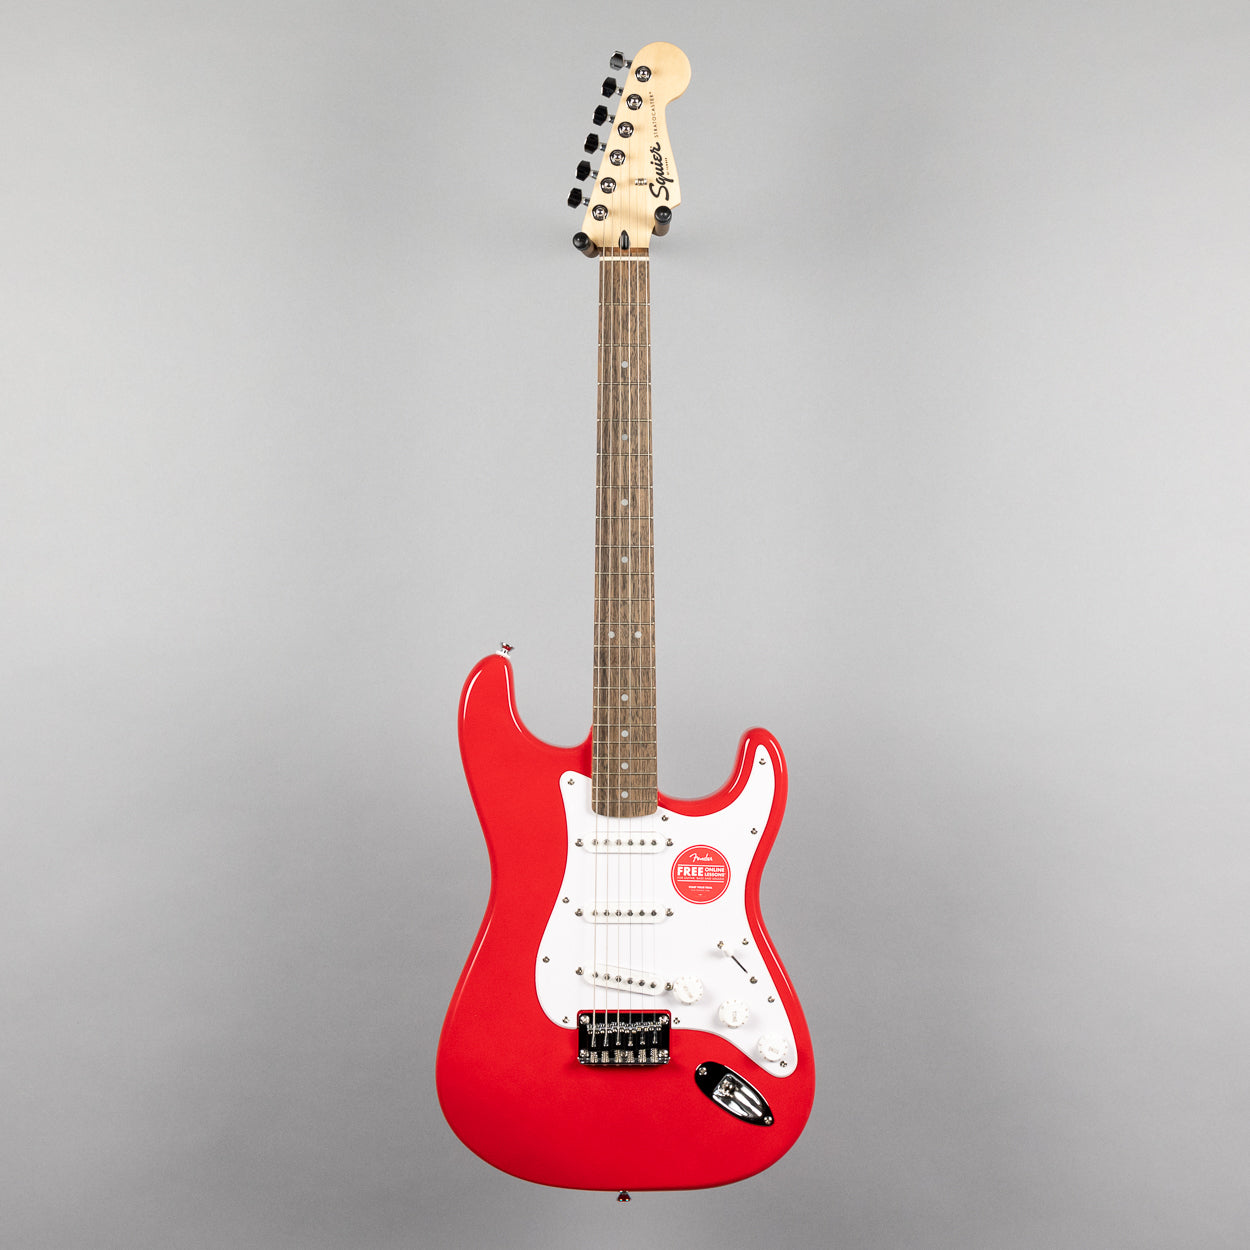 Squier Sonic Stratocaster HT in Torino Red